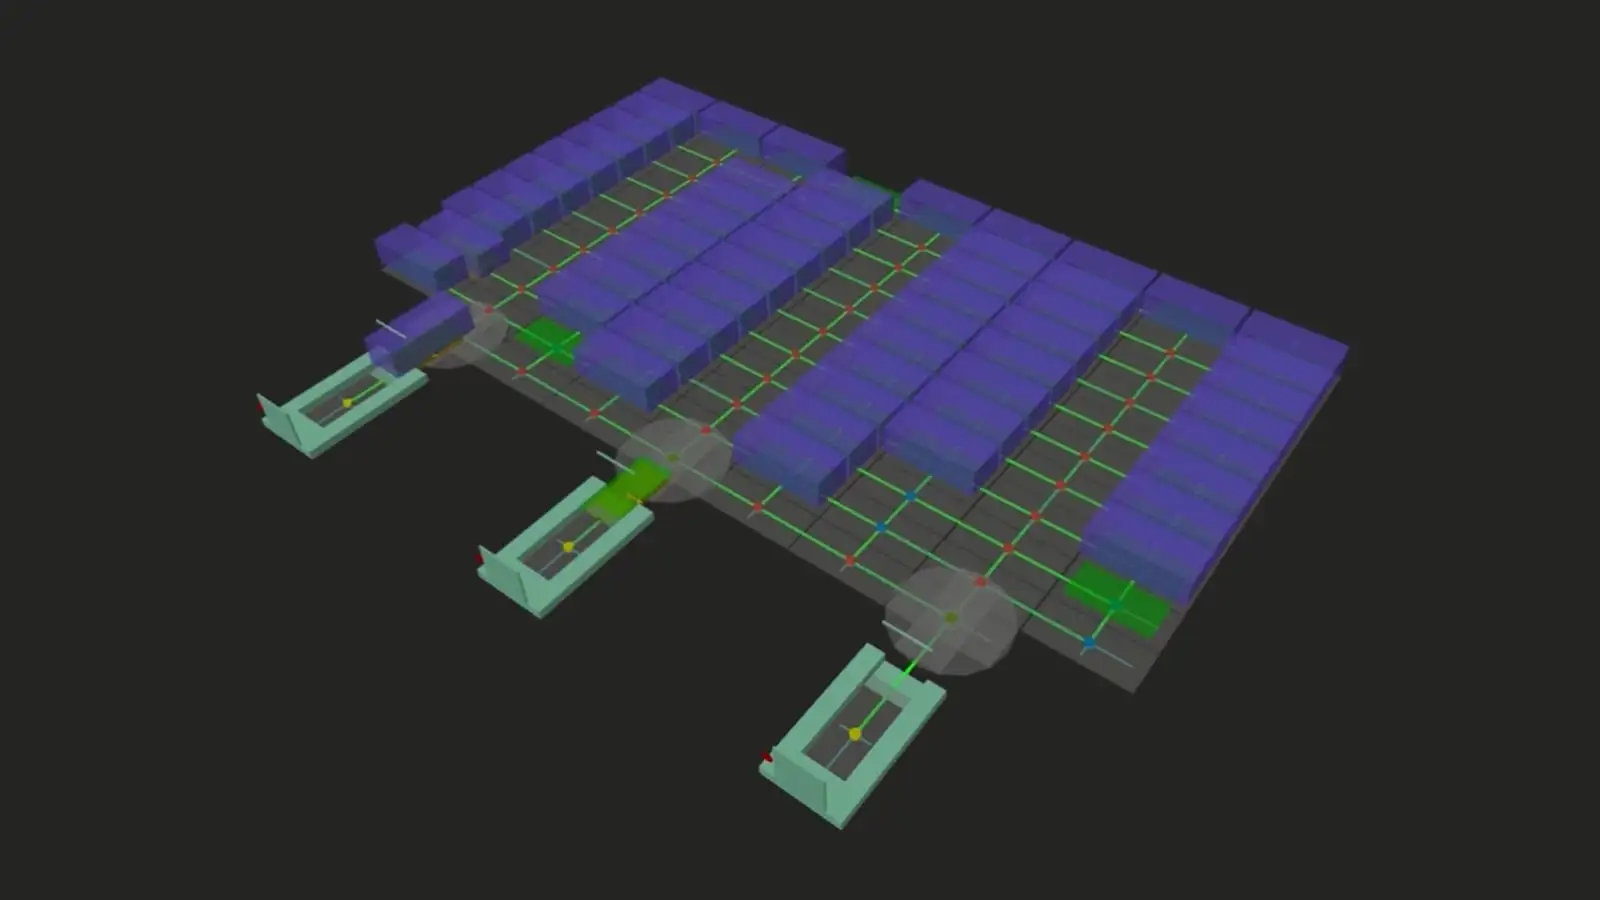 A software visualization of a path planning system to move cars inside a garage. The purple boxes represent cars, and the green squares represent robots that move the cars within the garage.